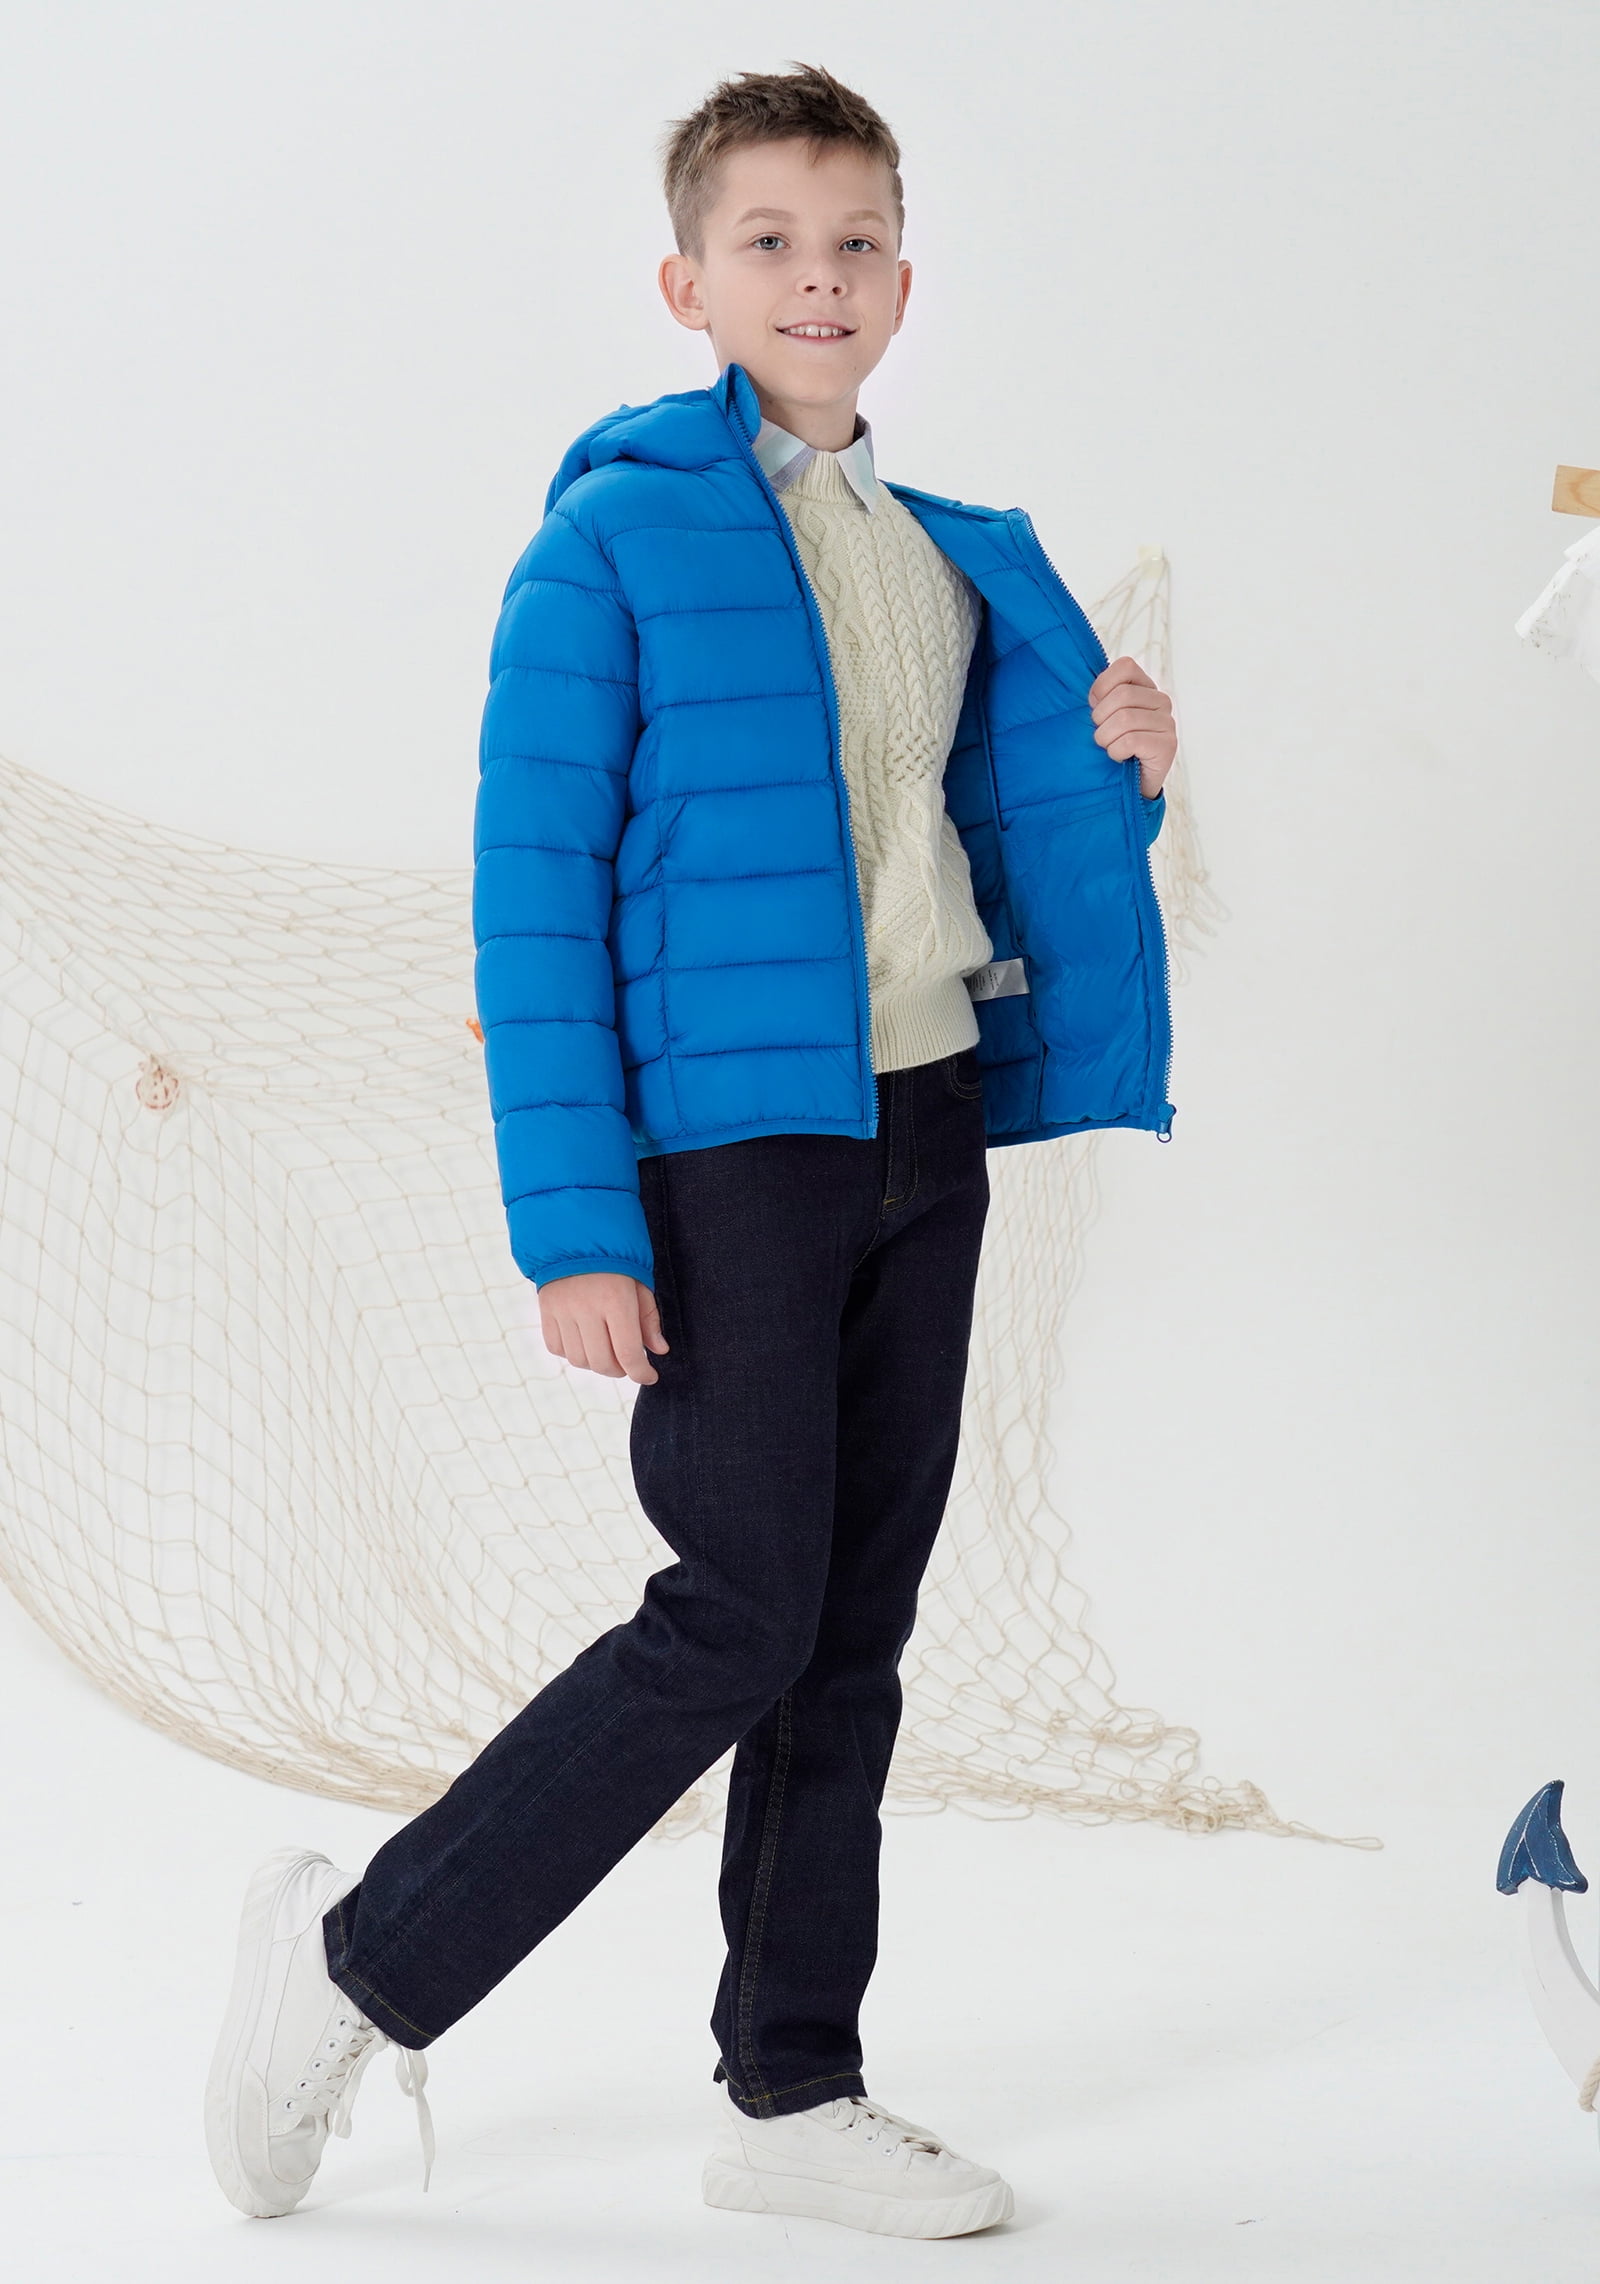 SOLOCOTE Boys Winter Coats Lightweight Water-Resistant Windproof Packable Hooded Down Like Padding Jacket 4-12 Years 